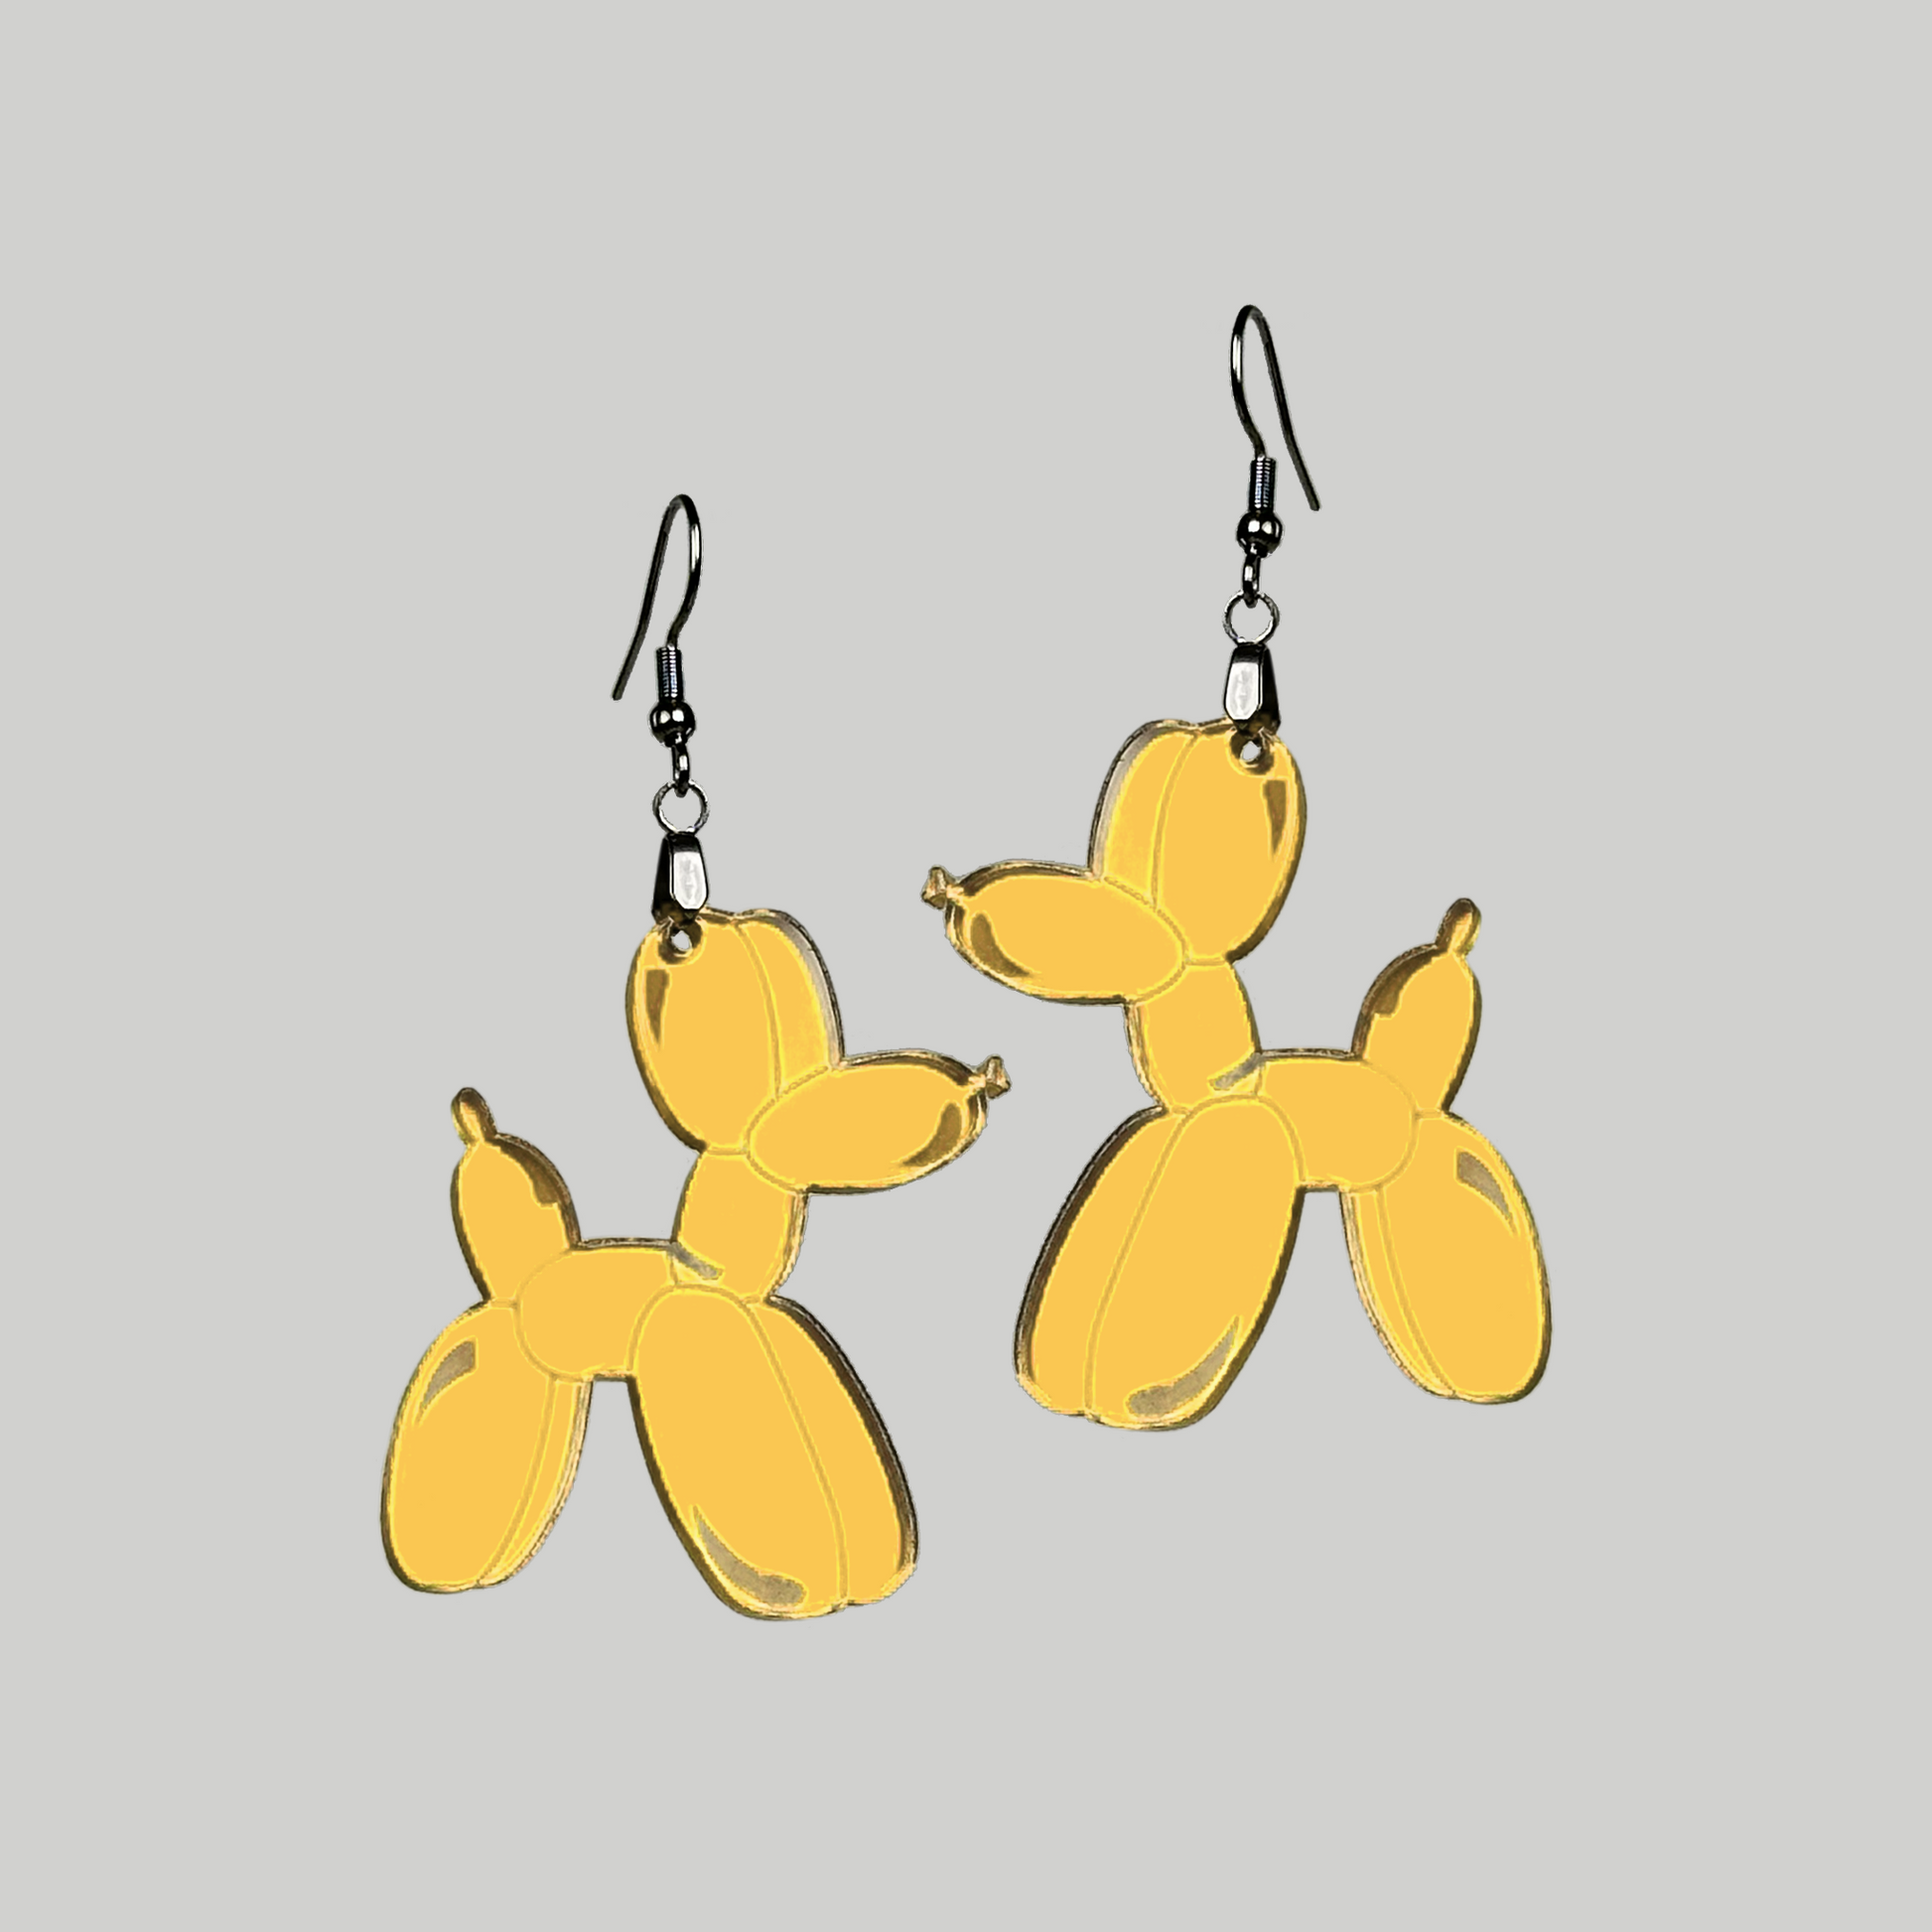 Adorable dog-shaped balloon animal earrings, adding a touch of fun and innocence to your fashion statement.